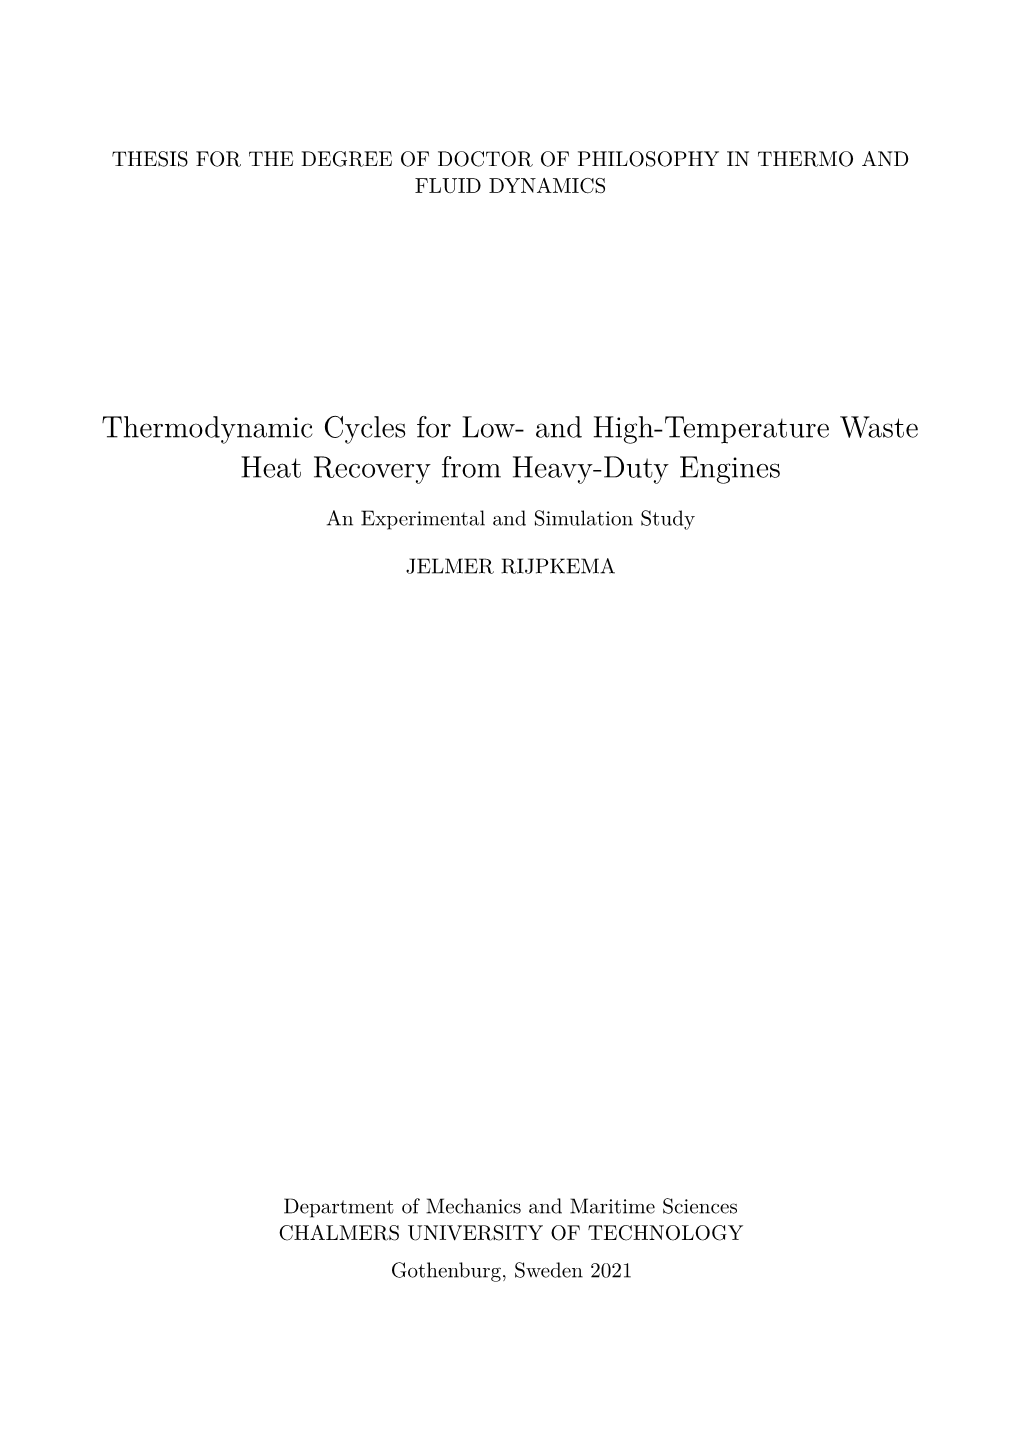 Thermodynamic Cycles for Low- and High-Temperature Waste Heat Recovery from Heavy-Duty Engines